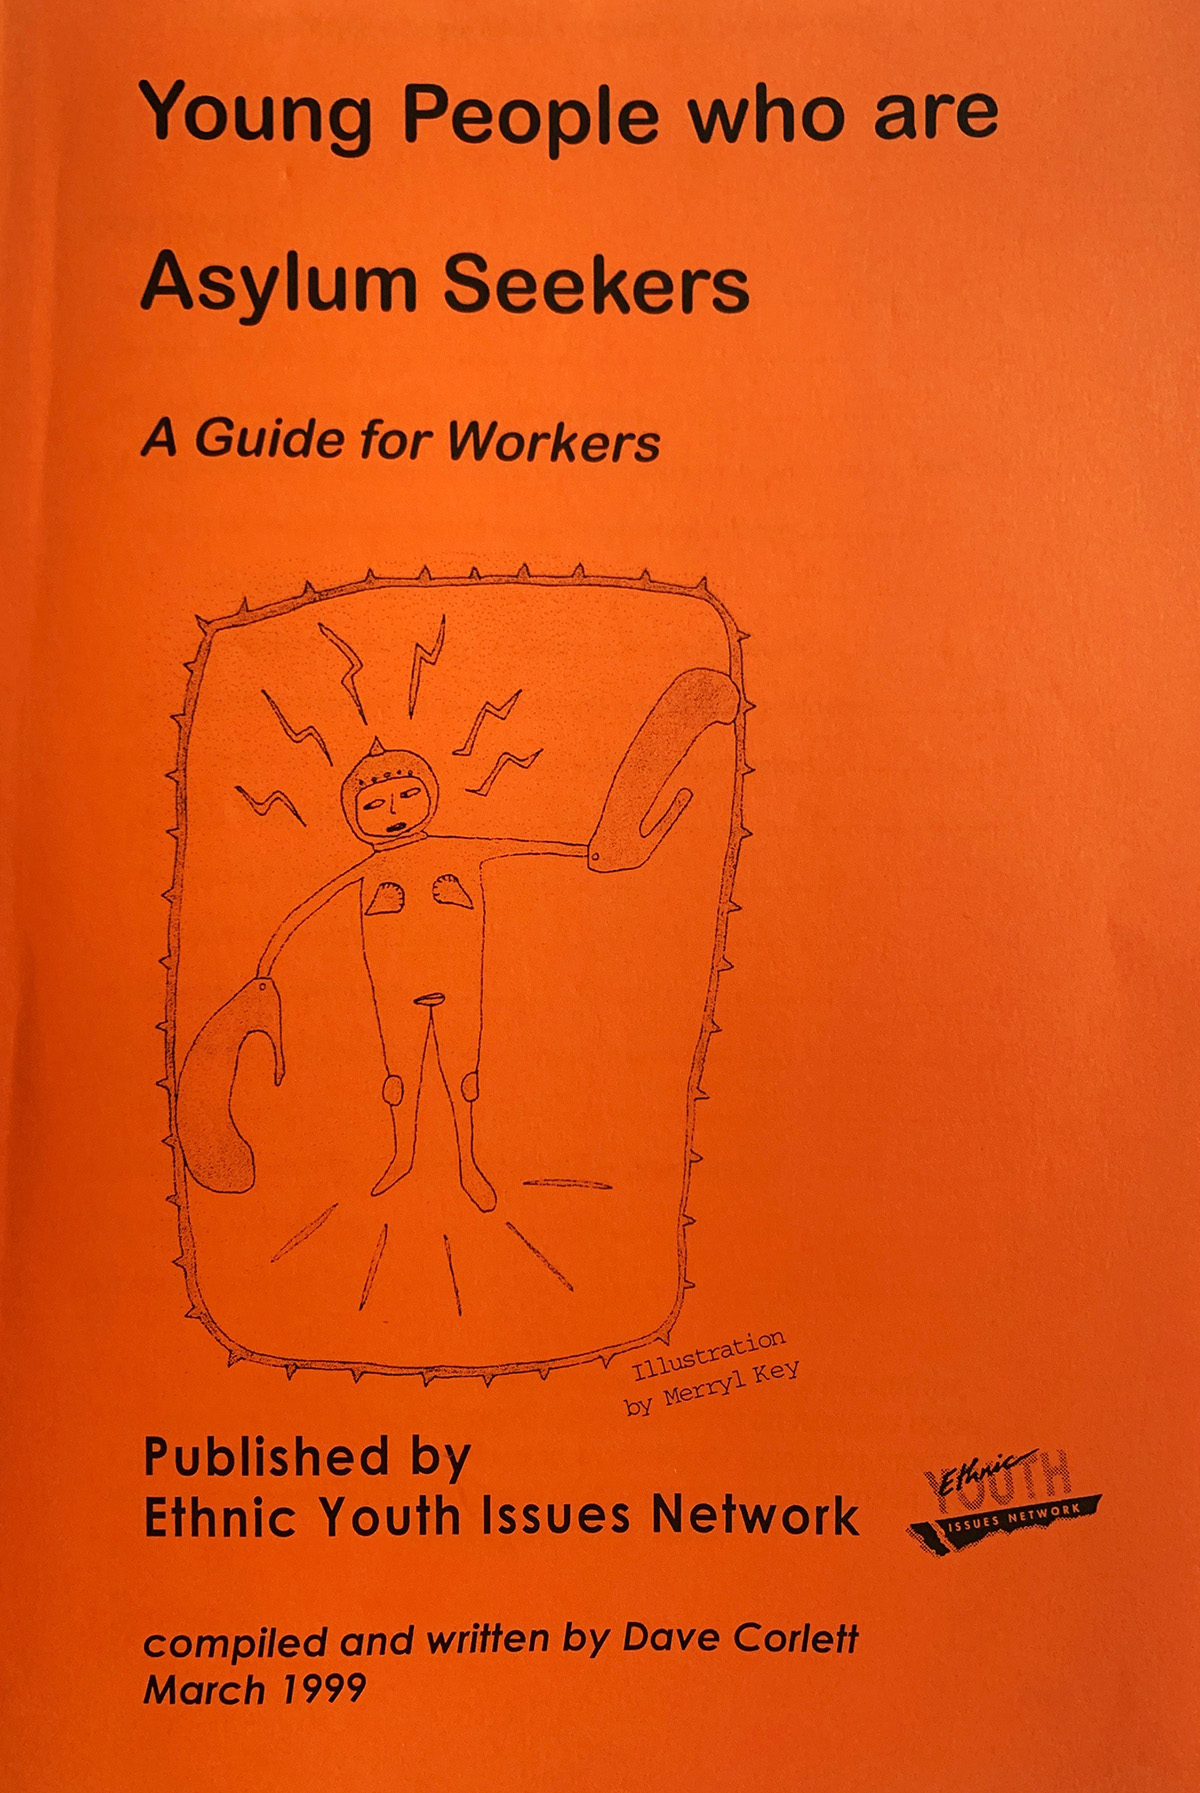 Corlett, D. (1999) Youth people who are Asylum Seekers: A Guide for Workers. Ethnic Youth Issues Network, Fitzroy.